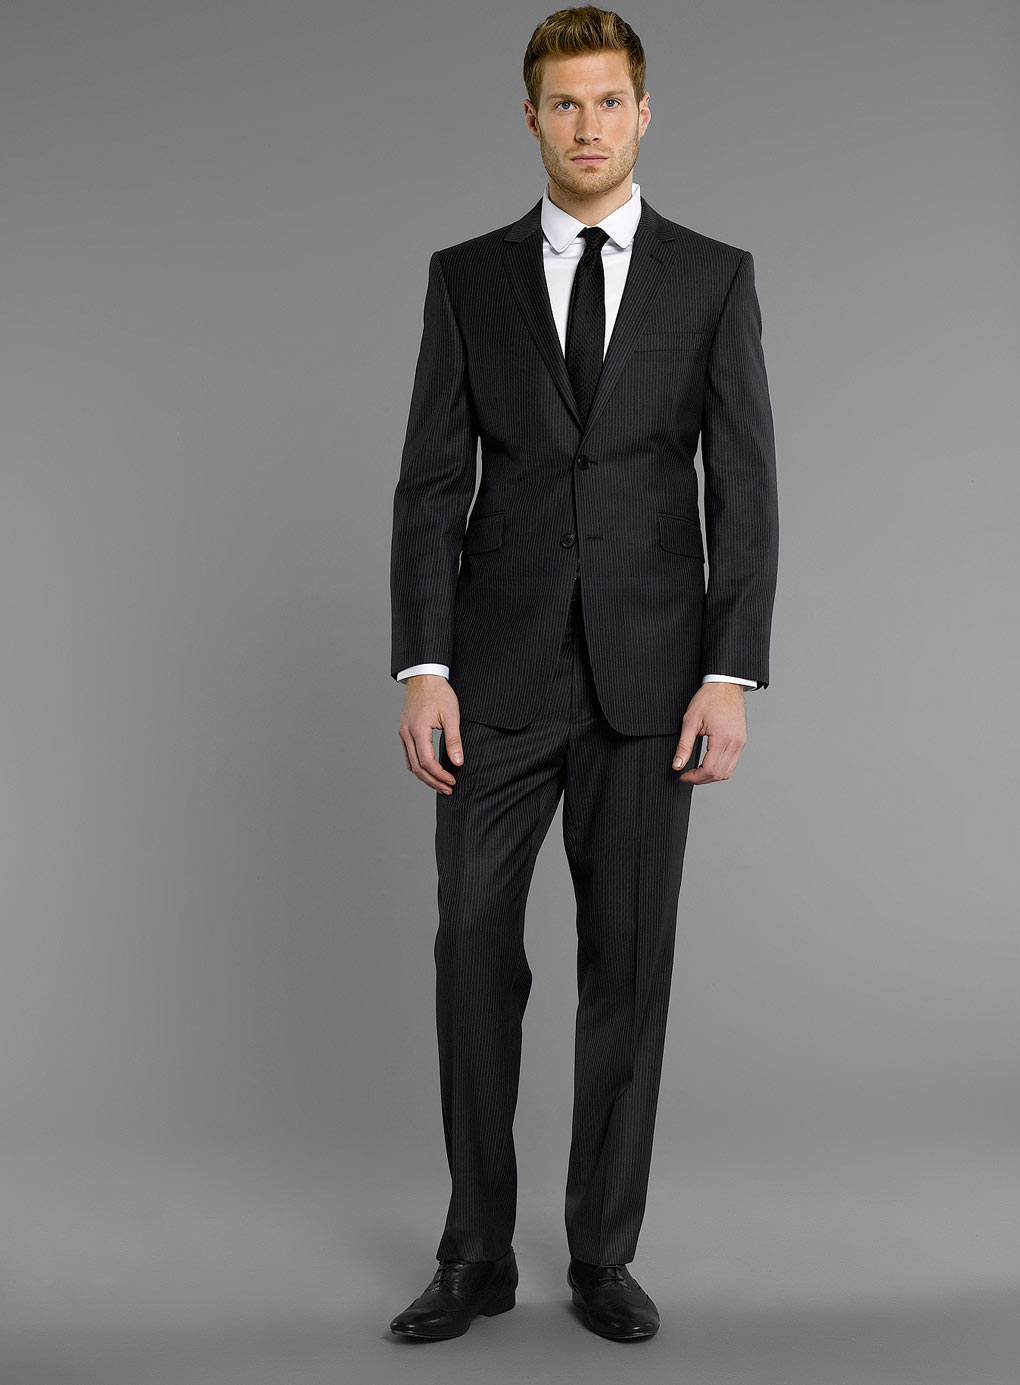 Men's Single Breasted Suits - NIBH